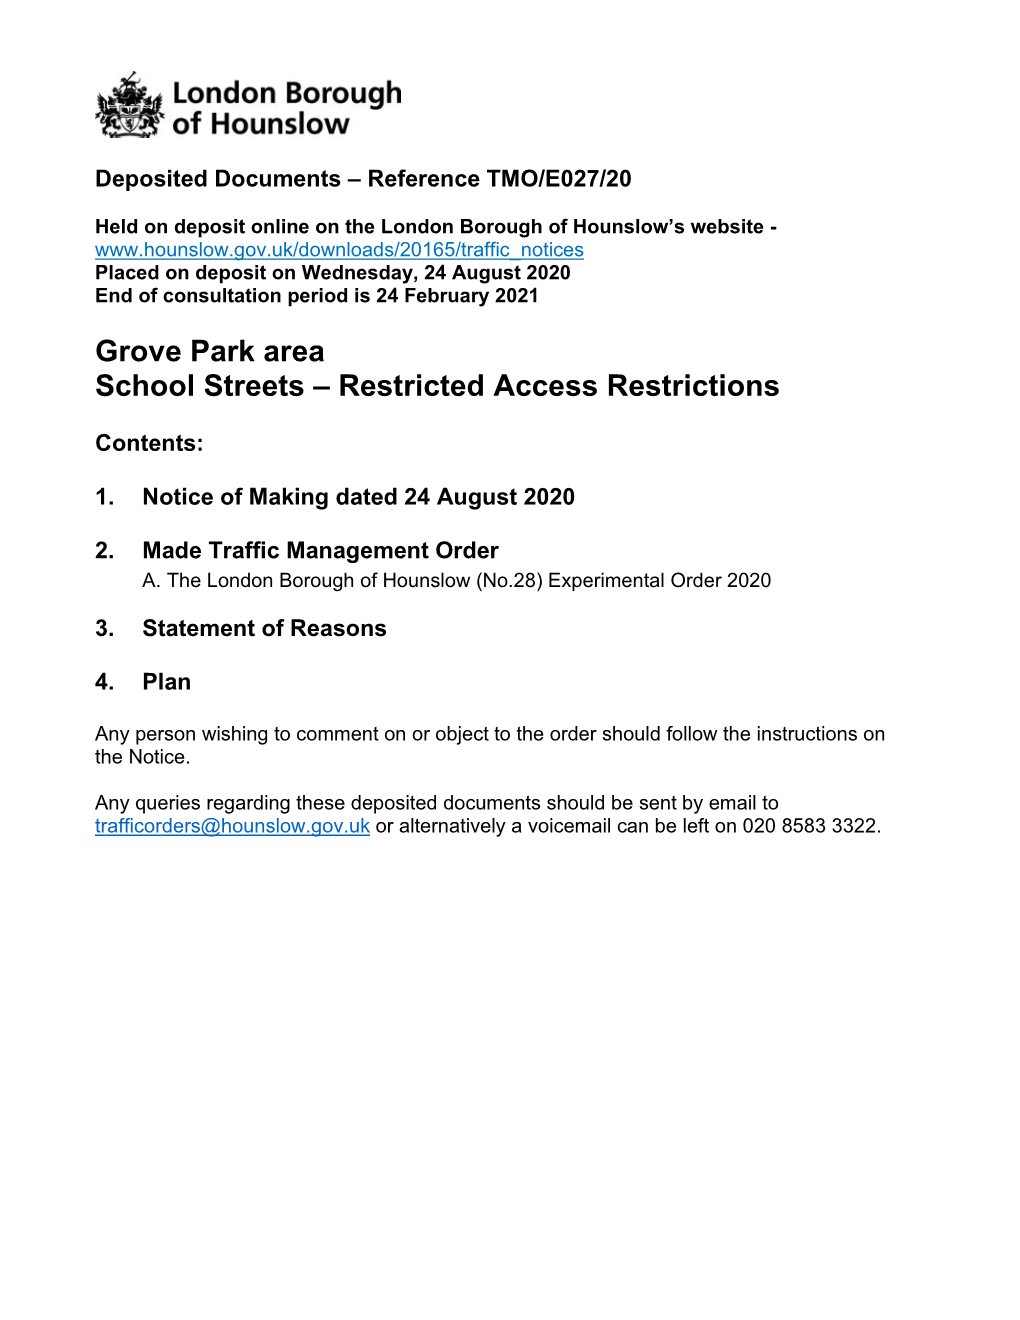 Grove Park Area School Streets – Restricted Access Restrictions